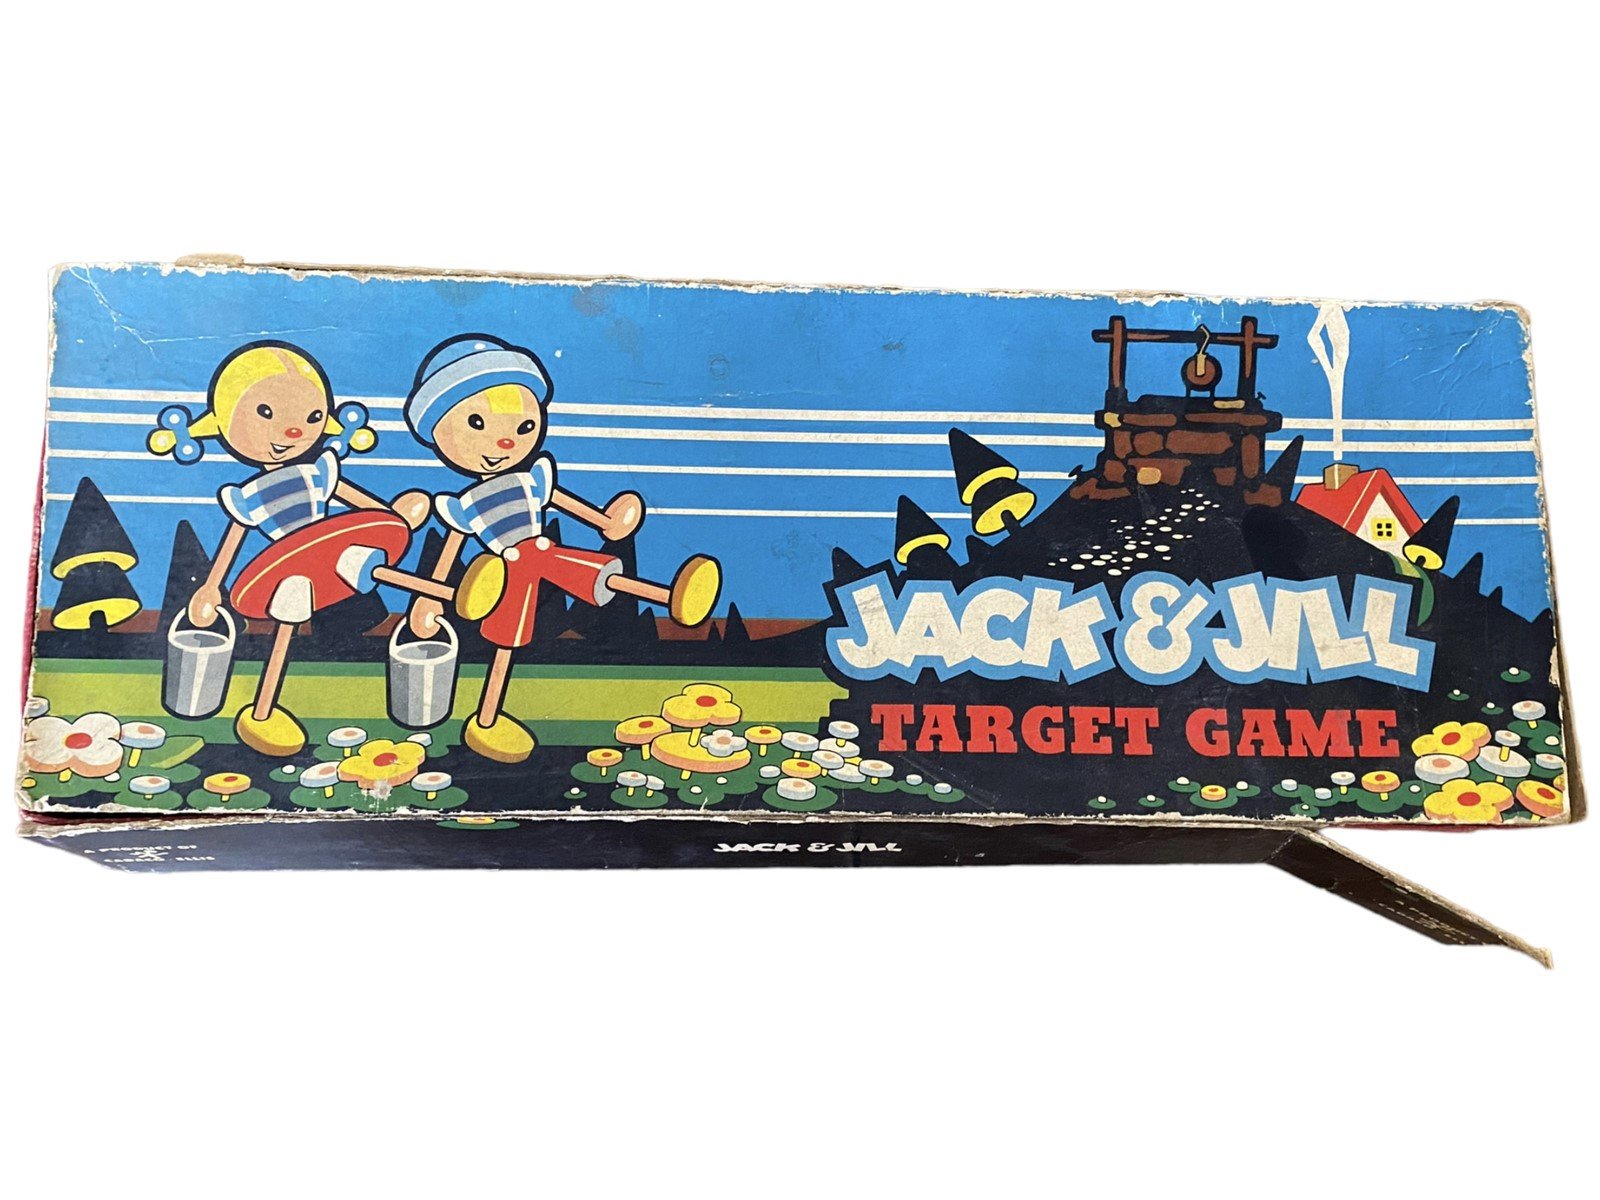 Jack and Jill Target Game With Ball a Product of Cadaco Ellis